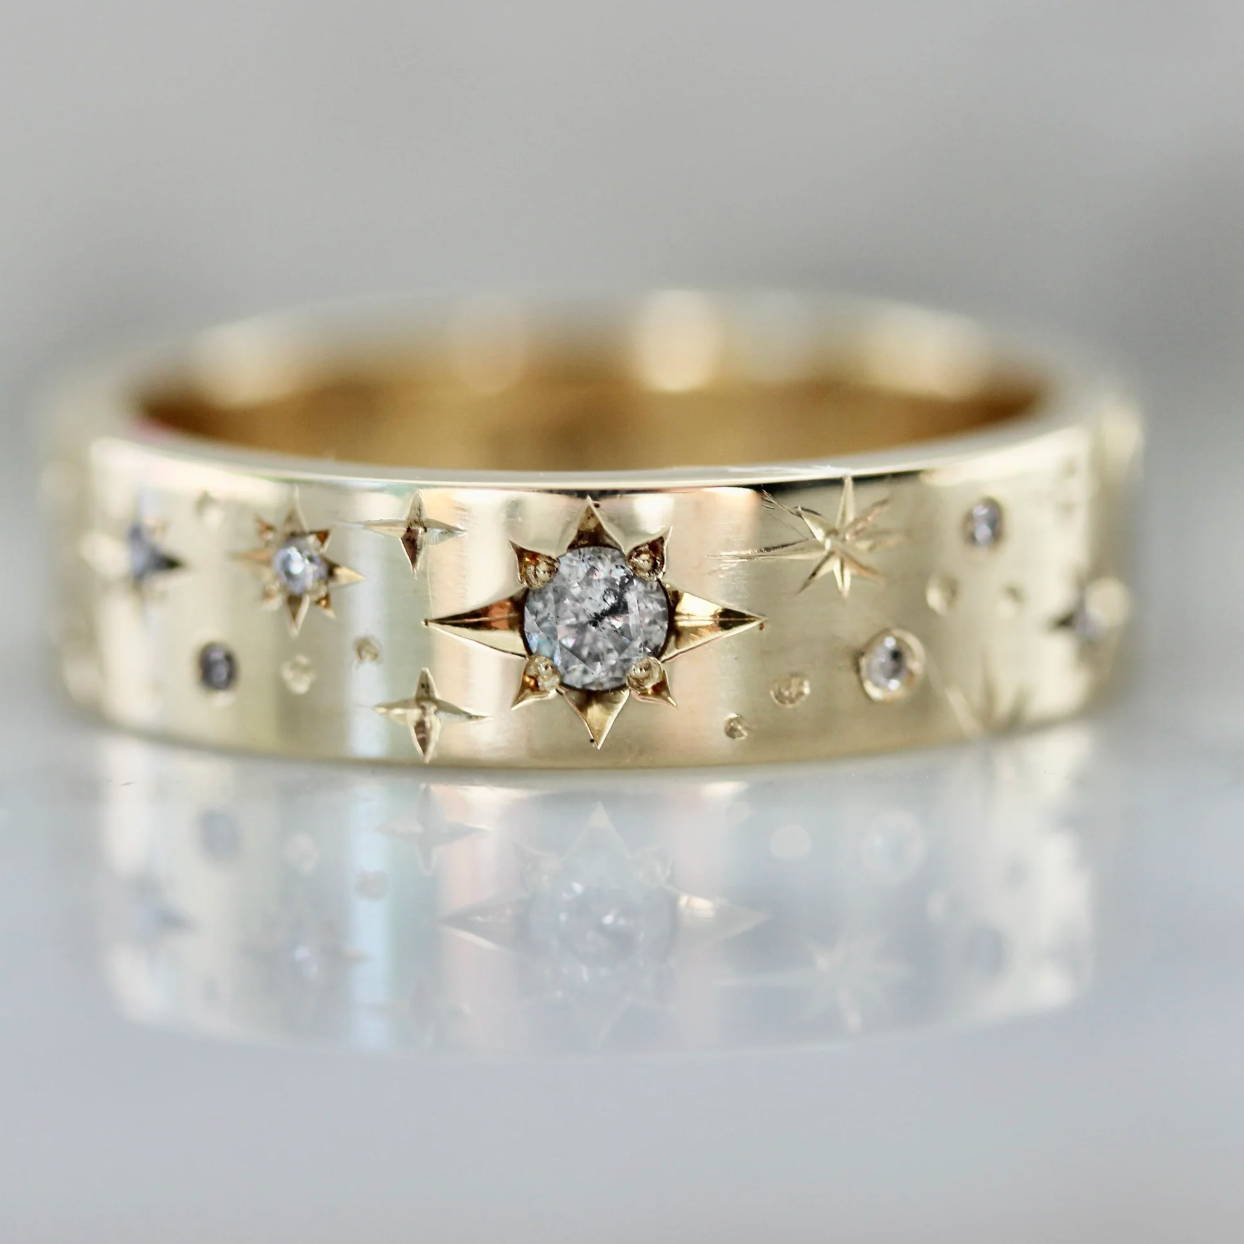 Gold band with star inset diamonds